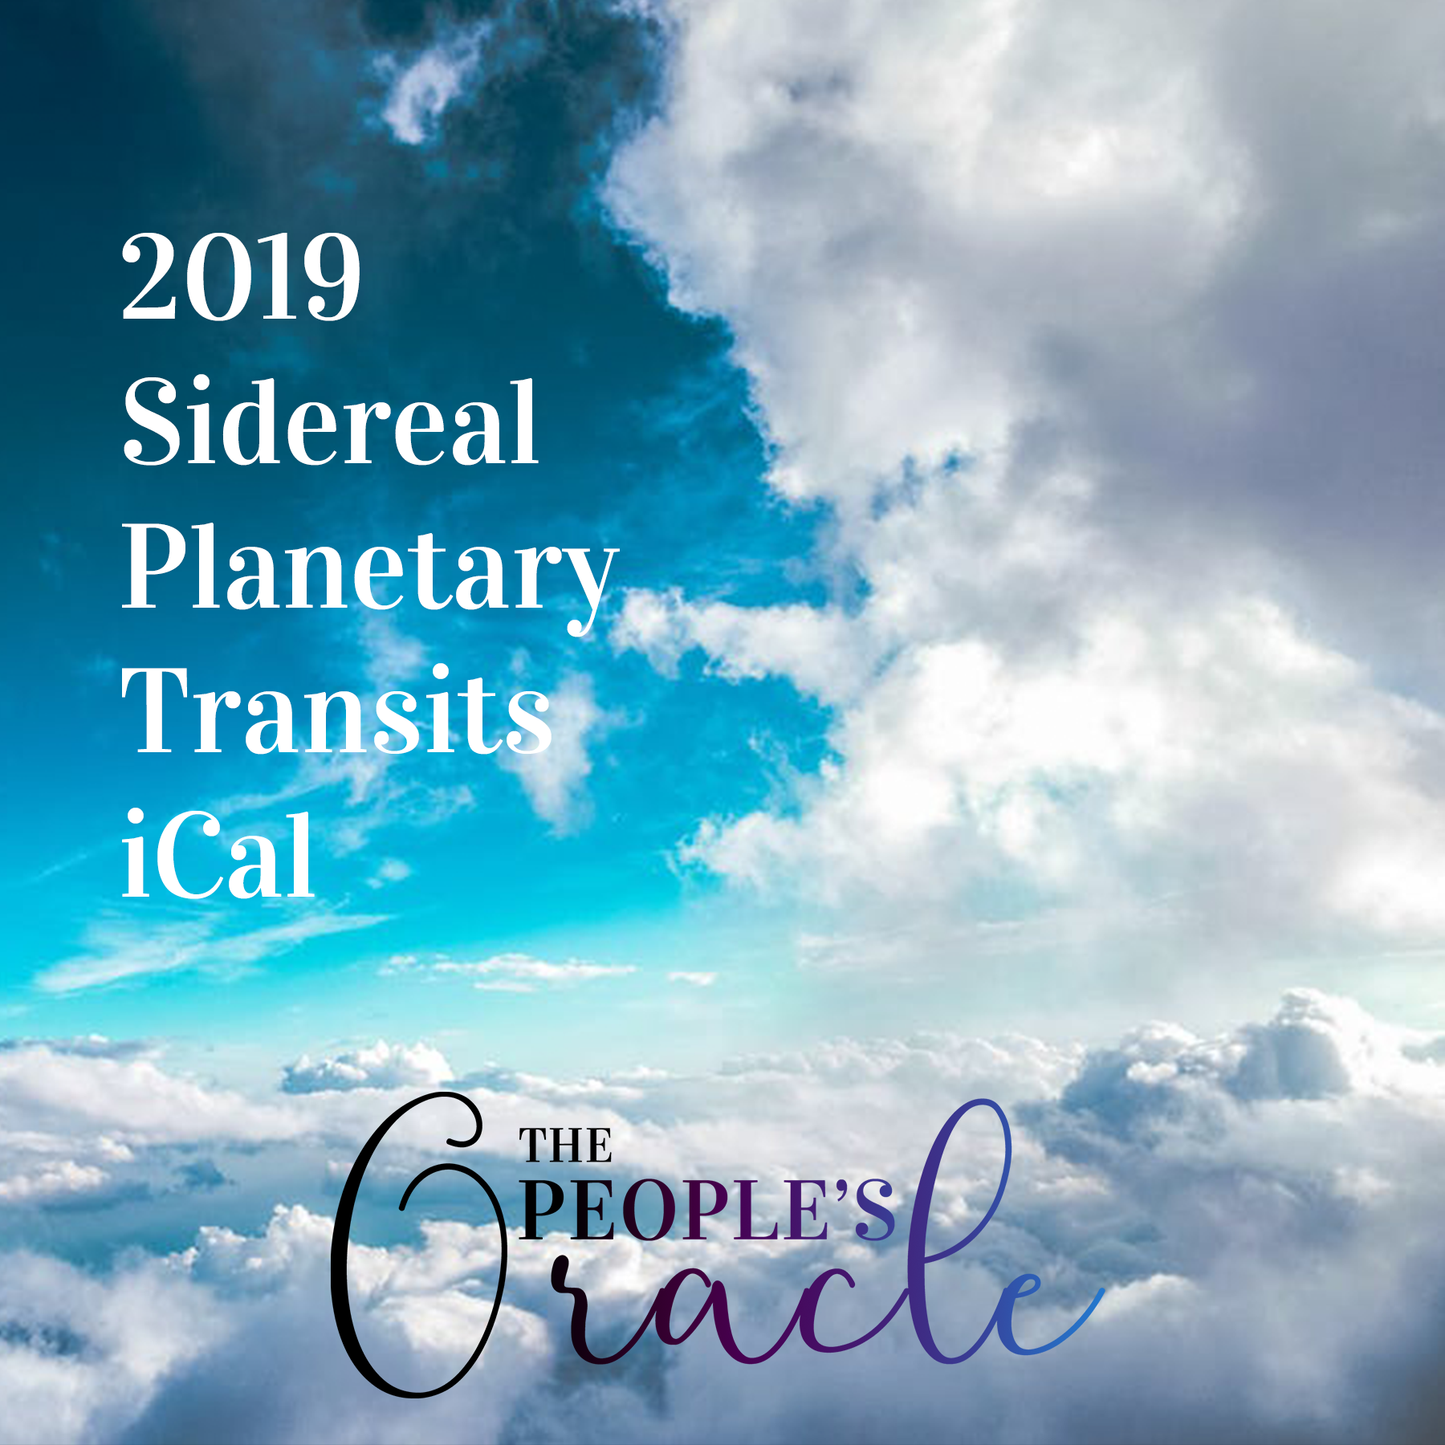 2019 Sidereal Planetary Transits iCal